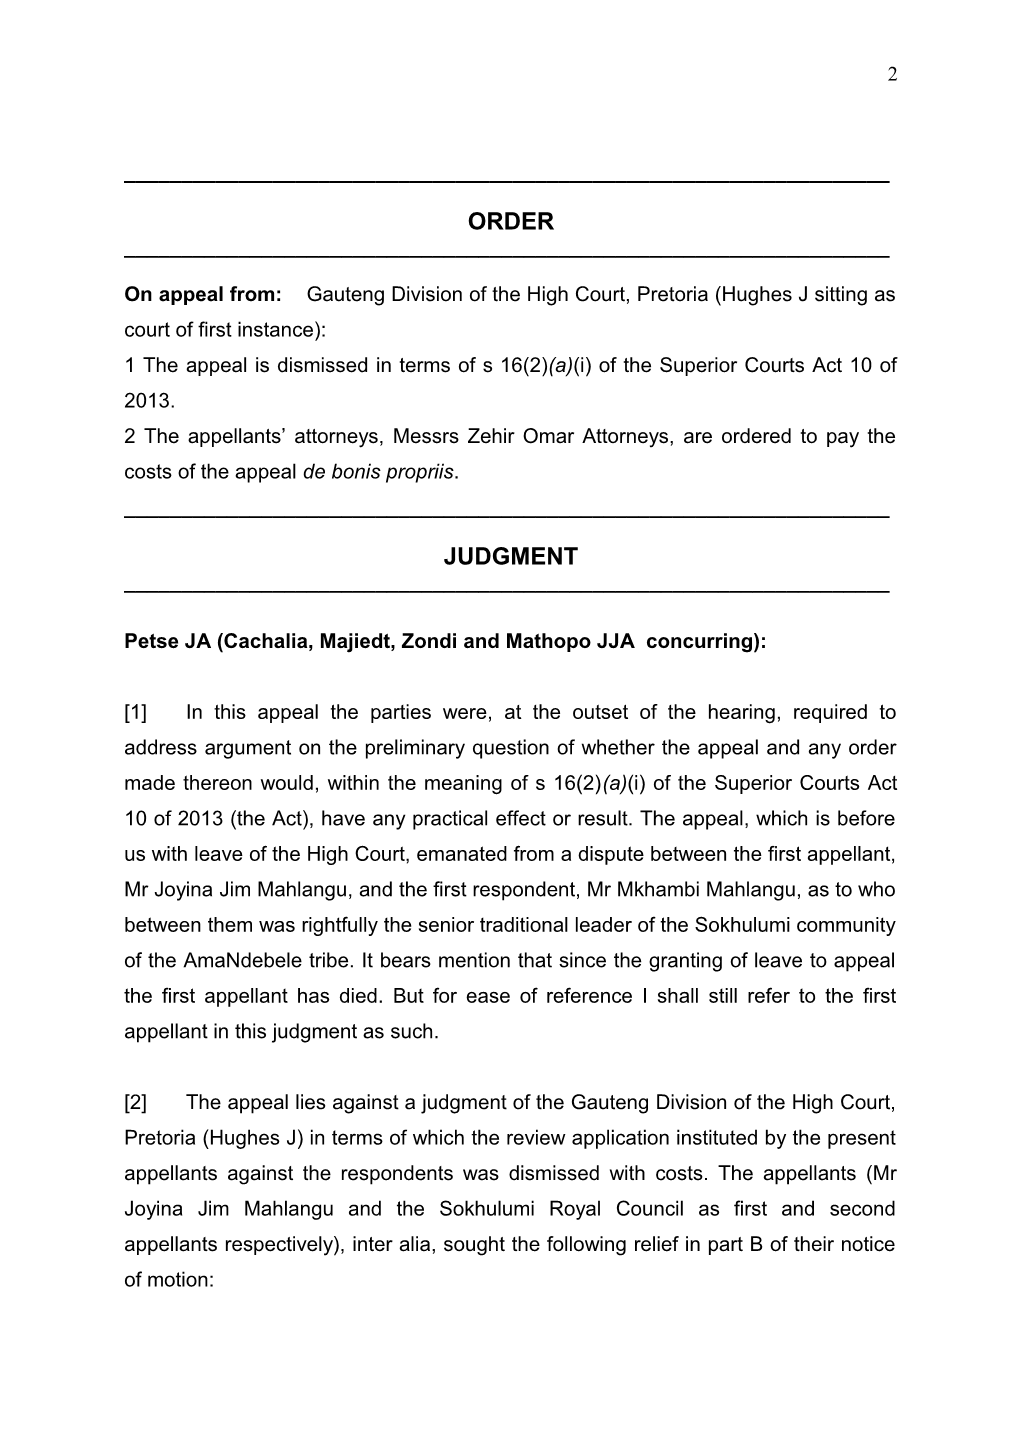 The Supreme Court of Appeal of South Africa